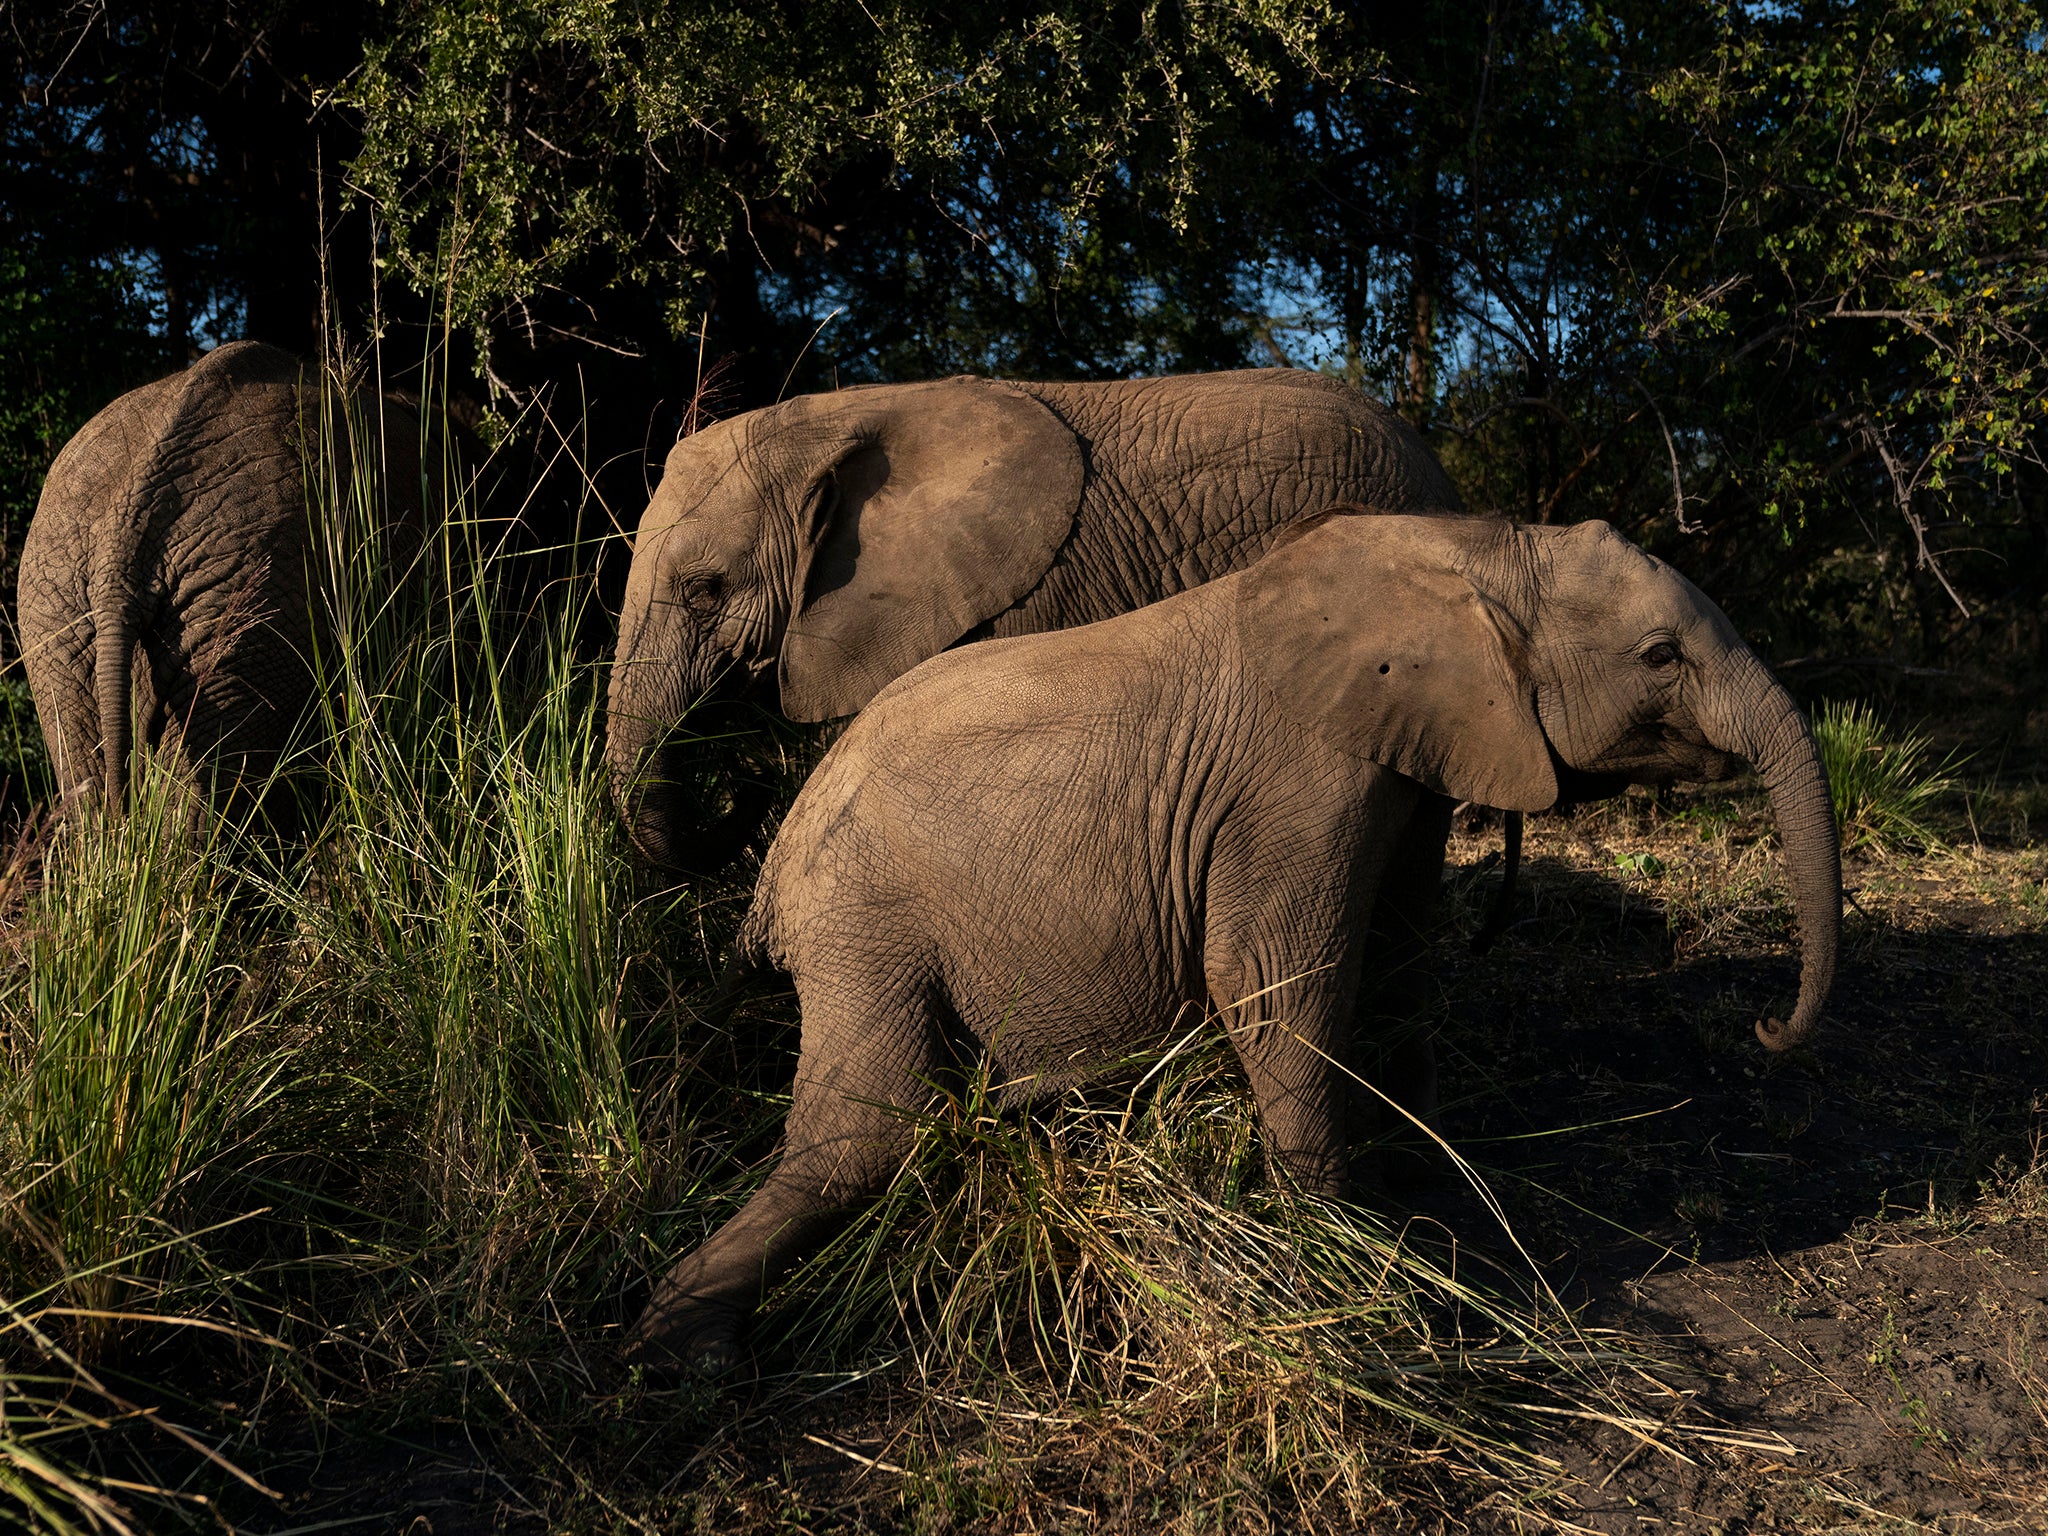 Molelo, Panda and Tuli eat and play in the grasses in the elephant orphanage at Elephants Without Borders in Kasane, Botswana